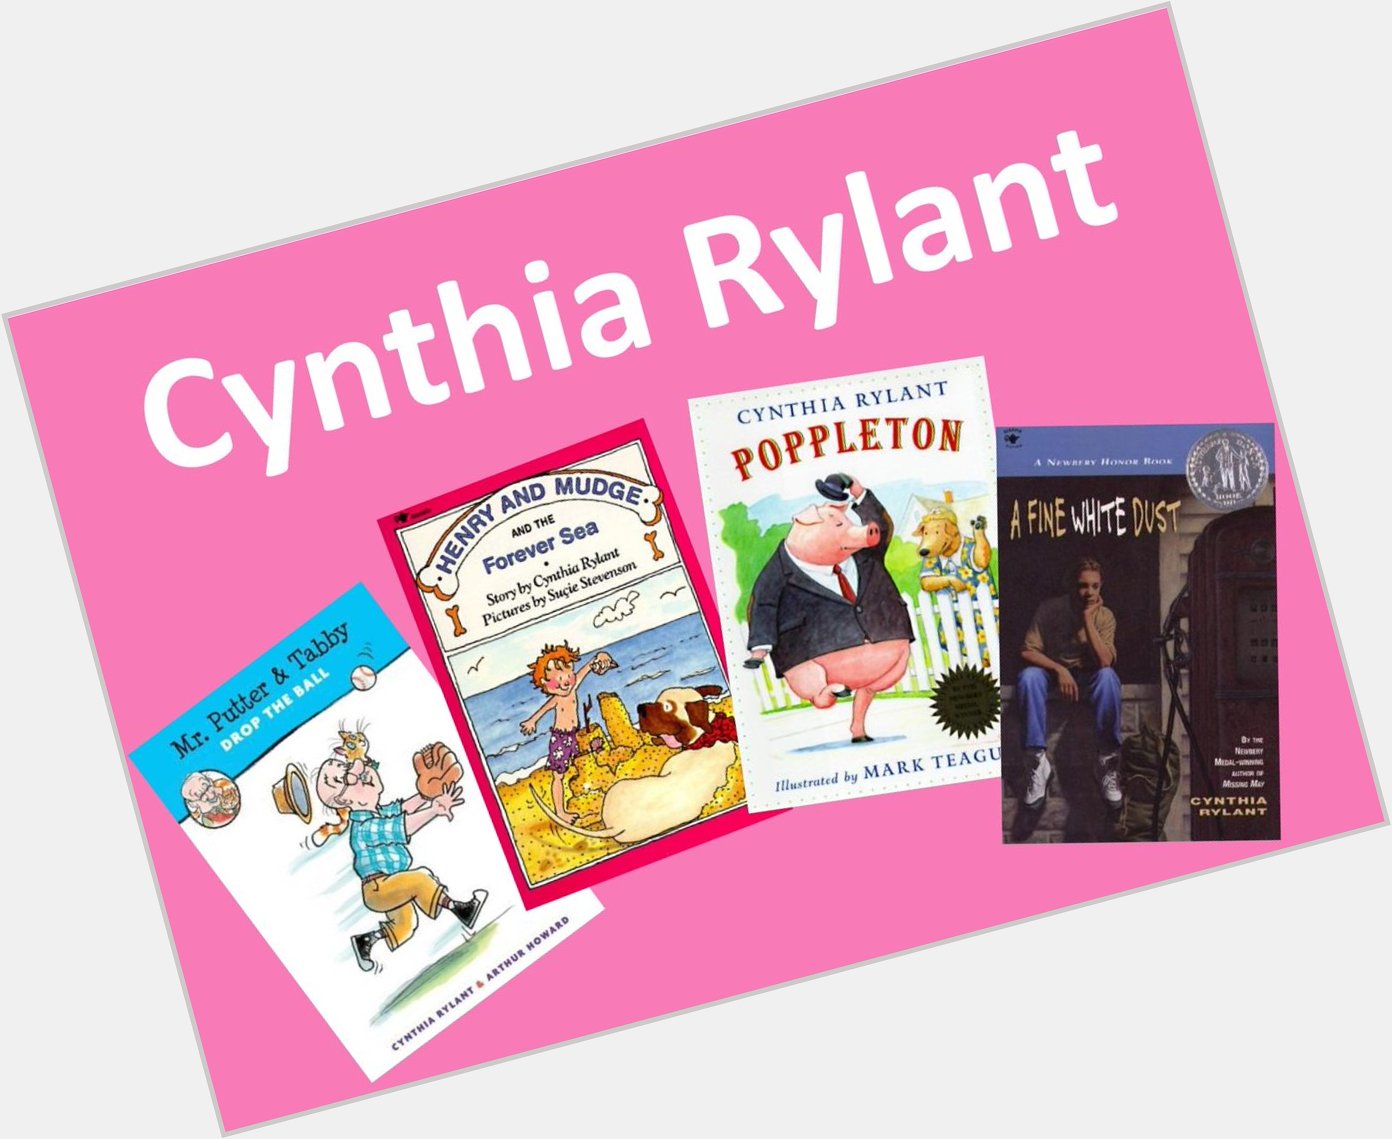 Happy birthday to Cynthia Rylant, author of countless books for children of all ages!  